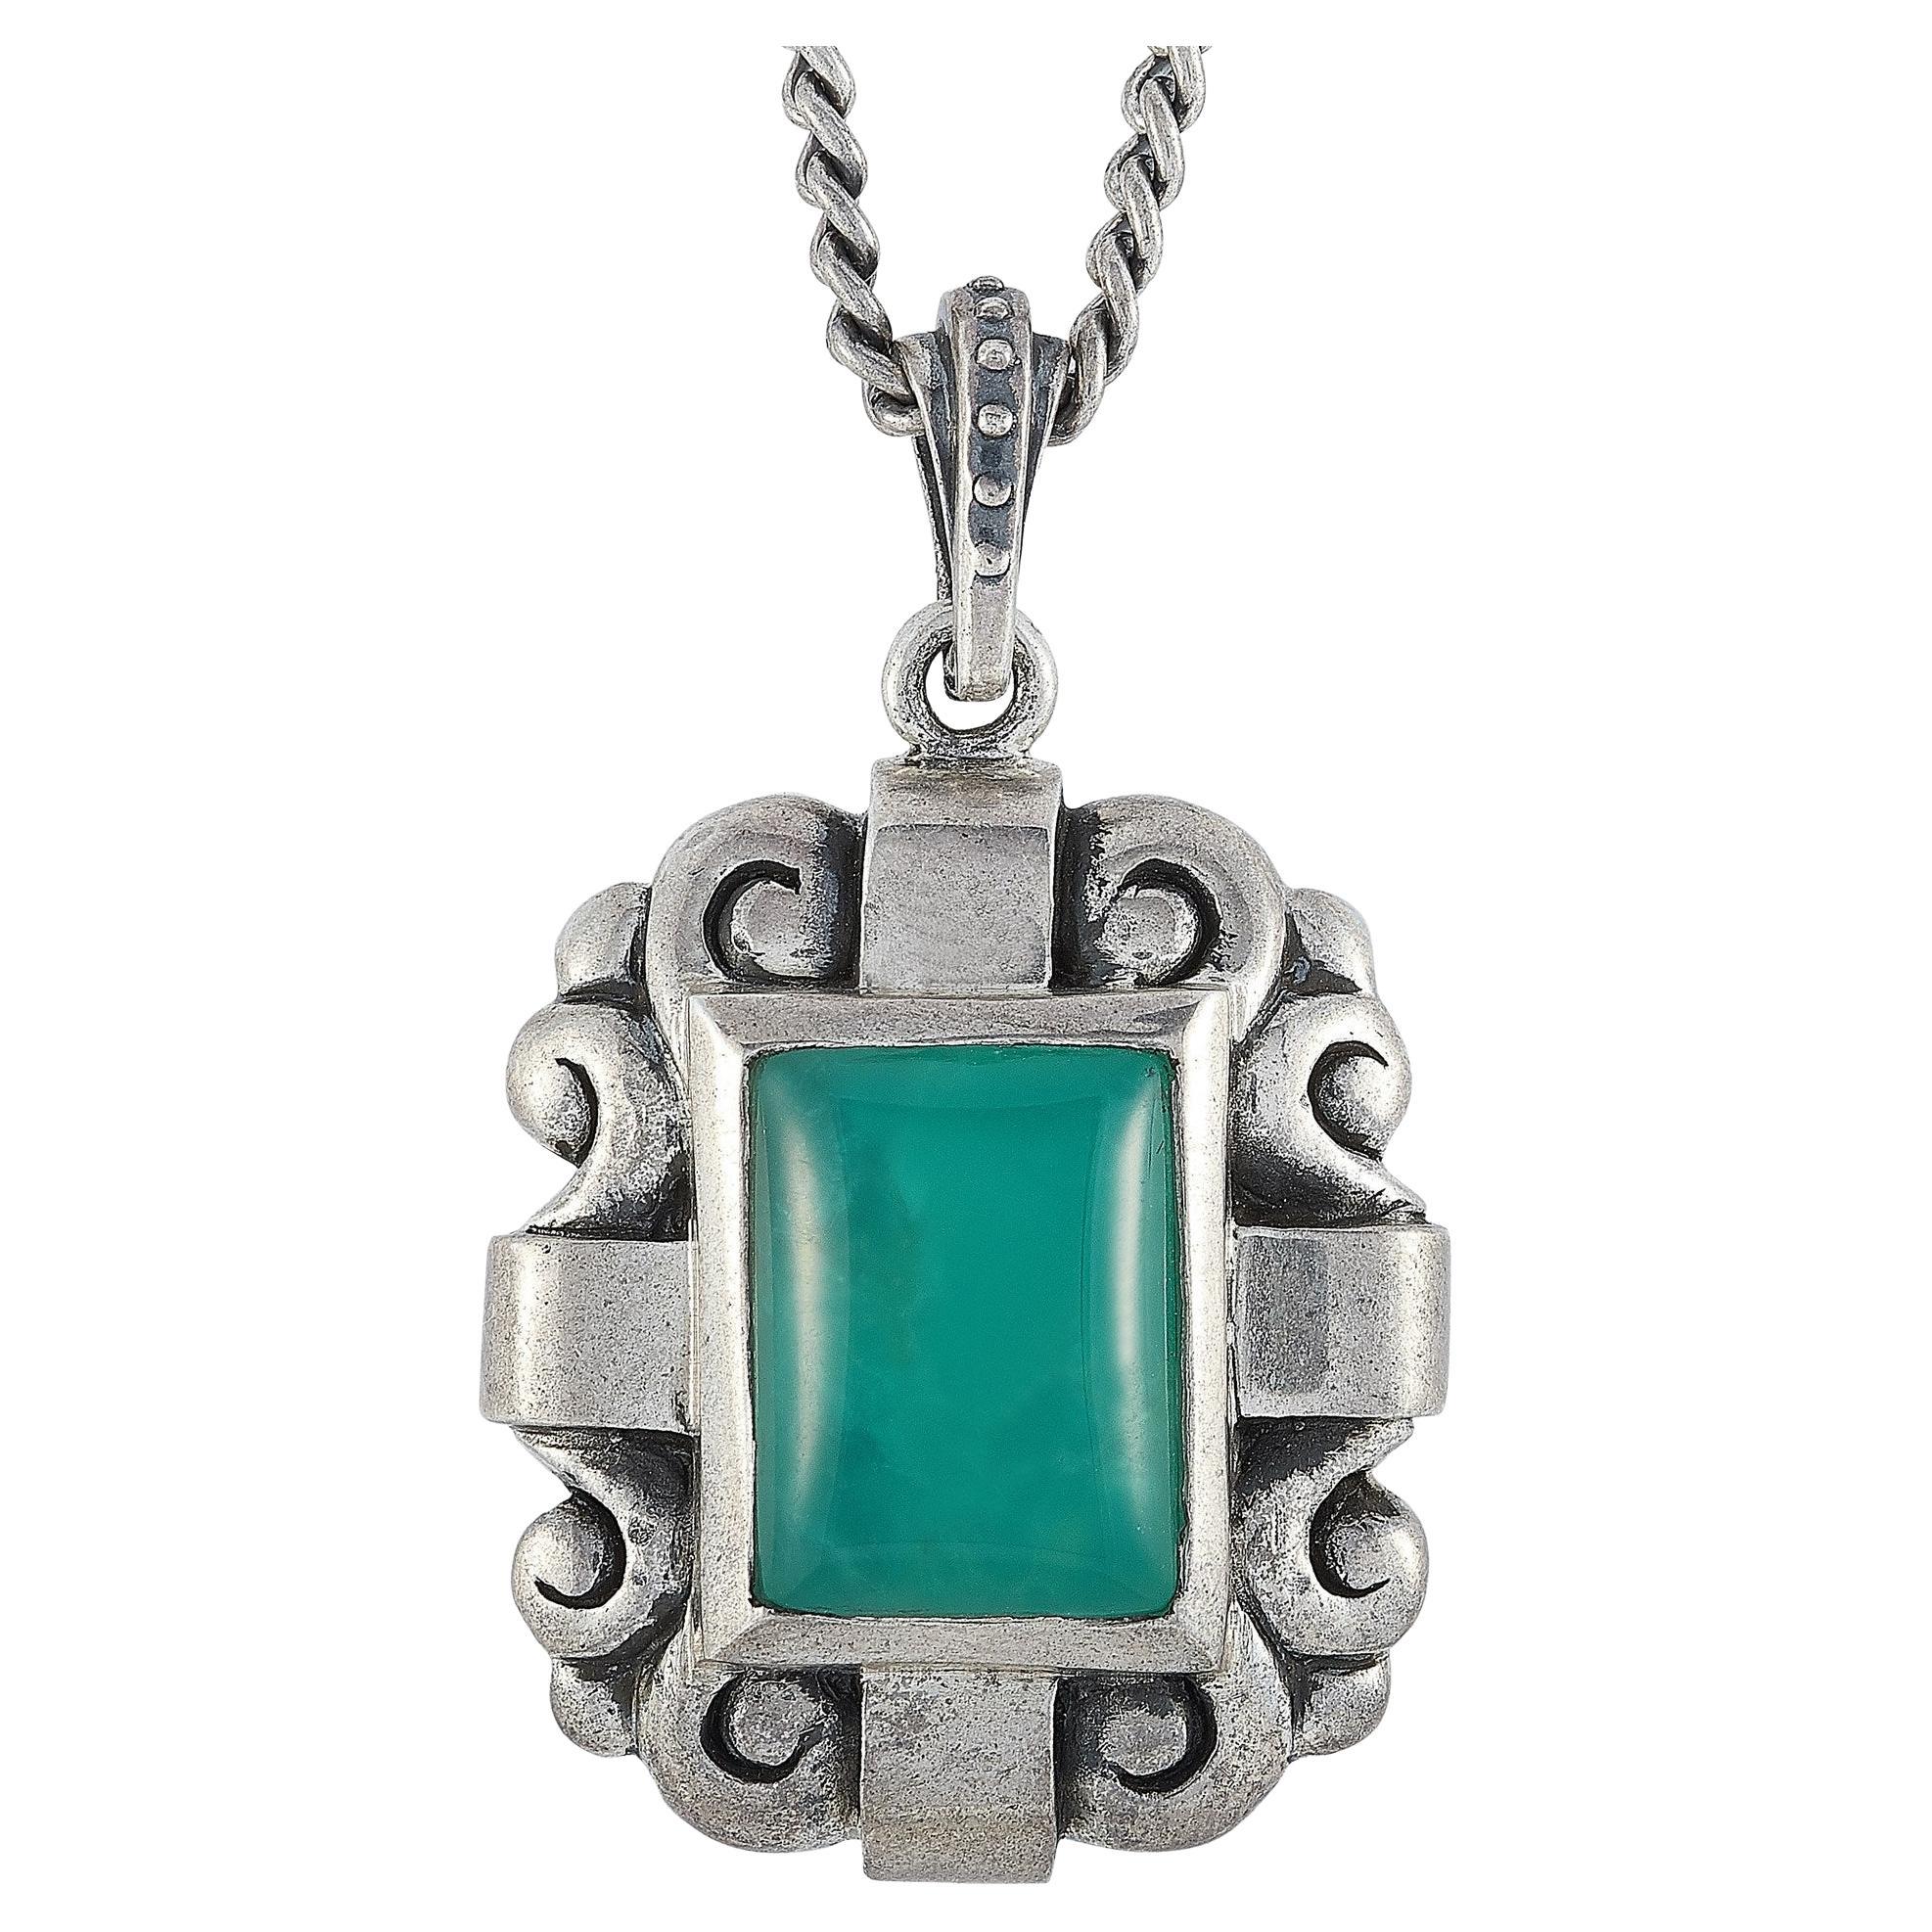 King Baby Silver and Chrysoprase Scrollwork Pendant Necklace